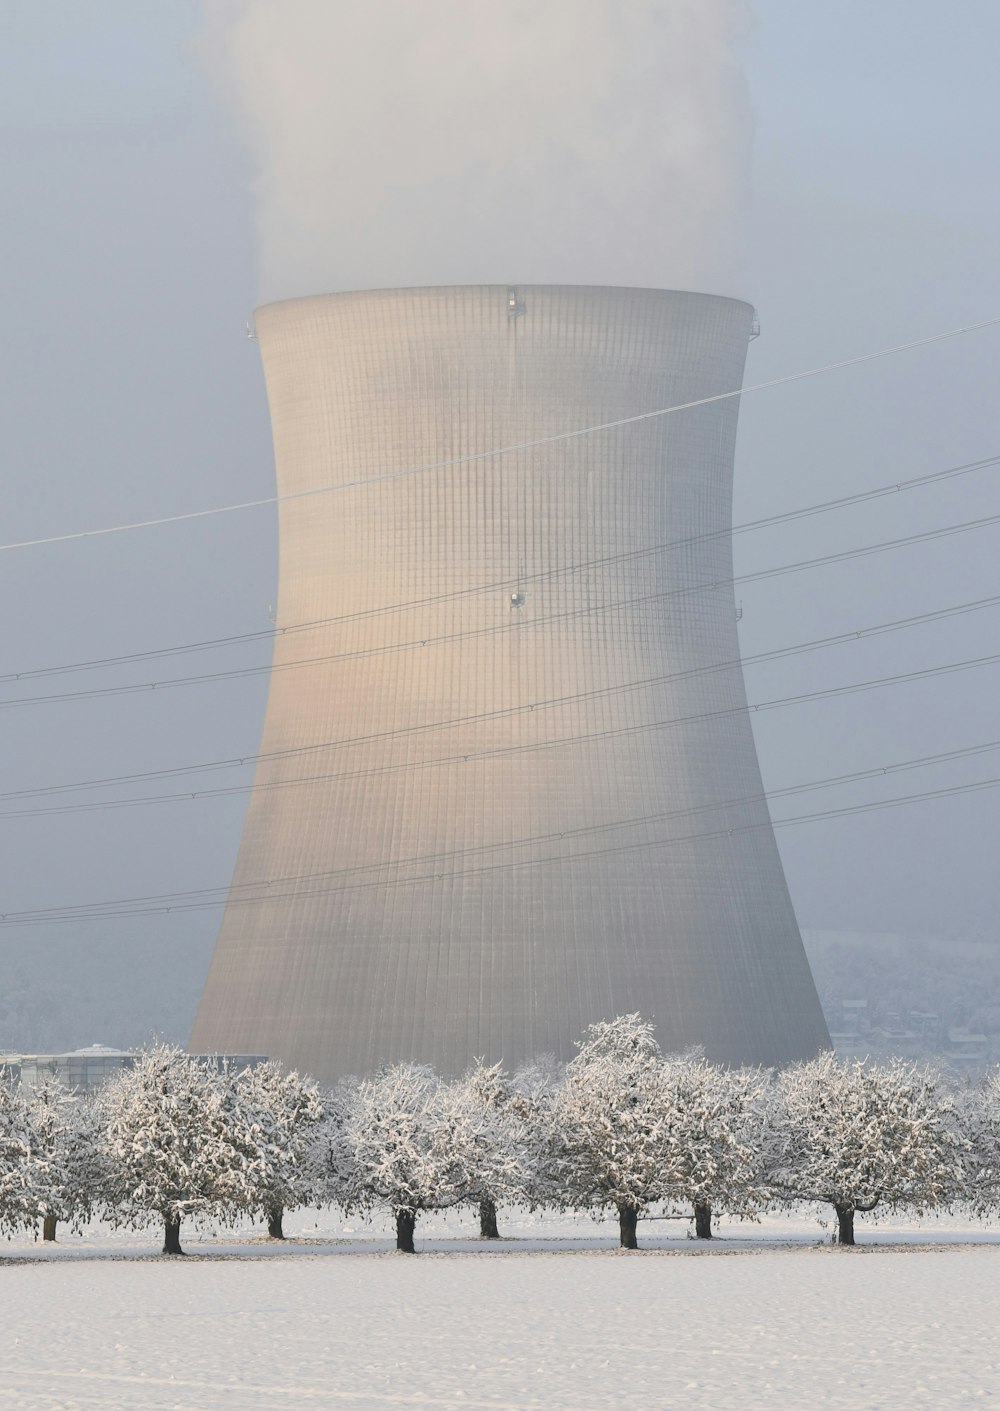 a nuclear power plant surrounded by snow covered trees